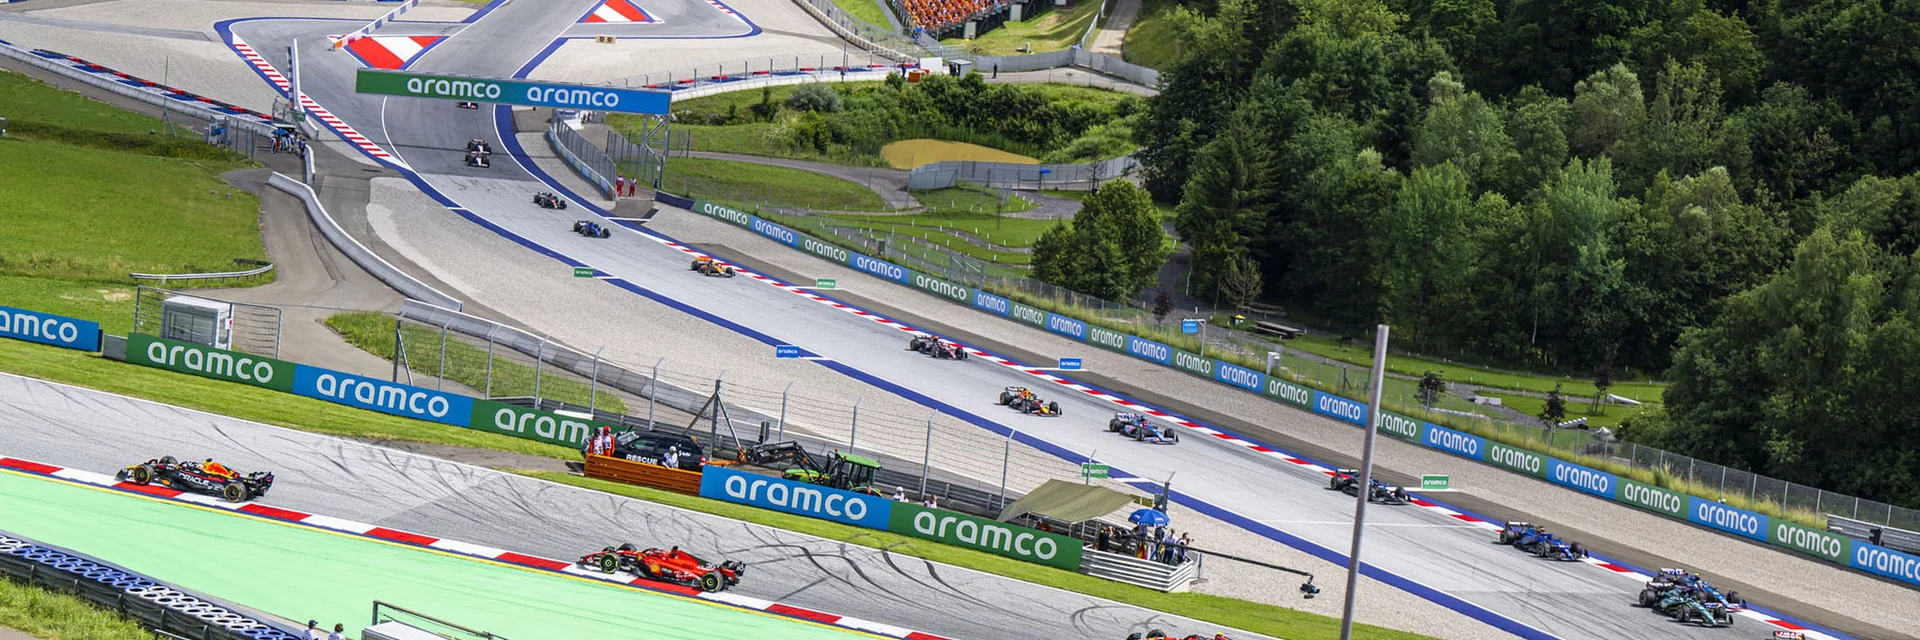 F1 GP AUT Curve 3 Overview | © Red Bull Ring  | Lucas Pripfl - Red Bull Ring